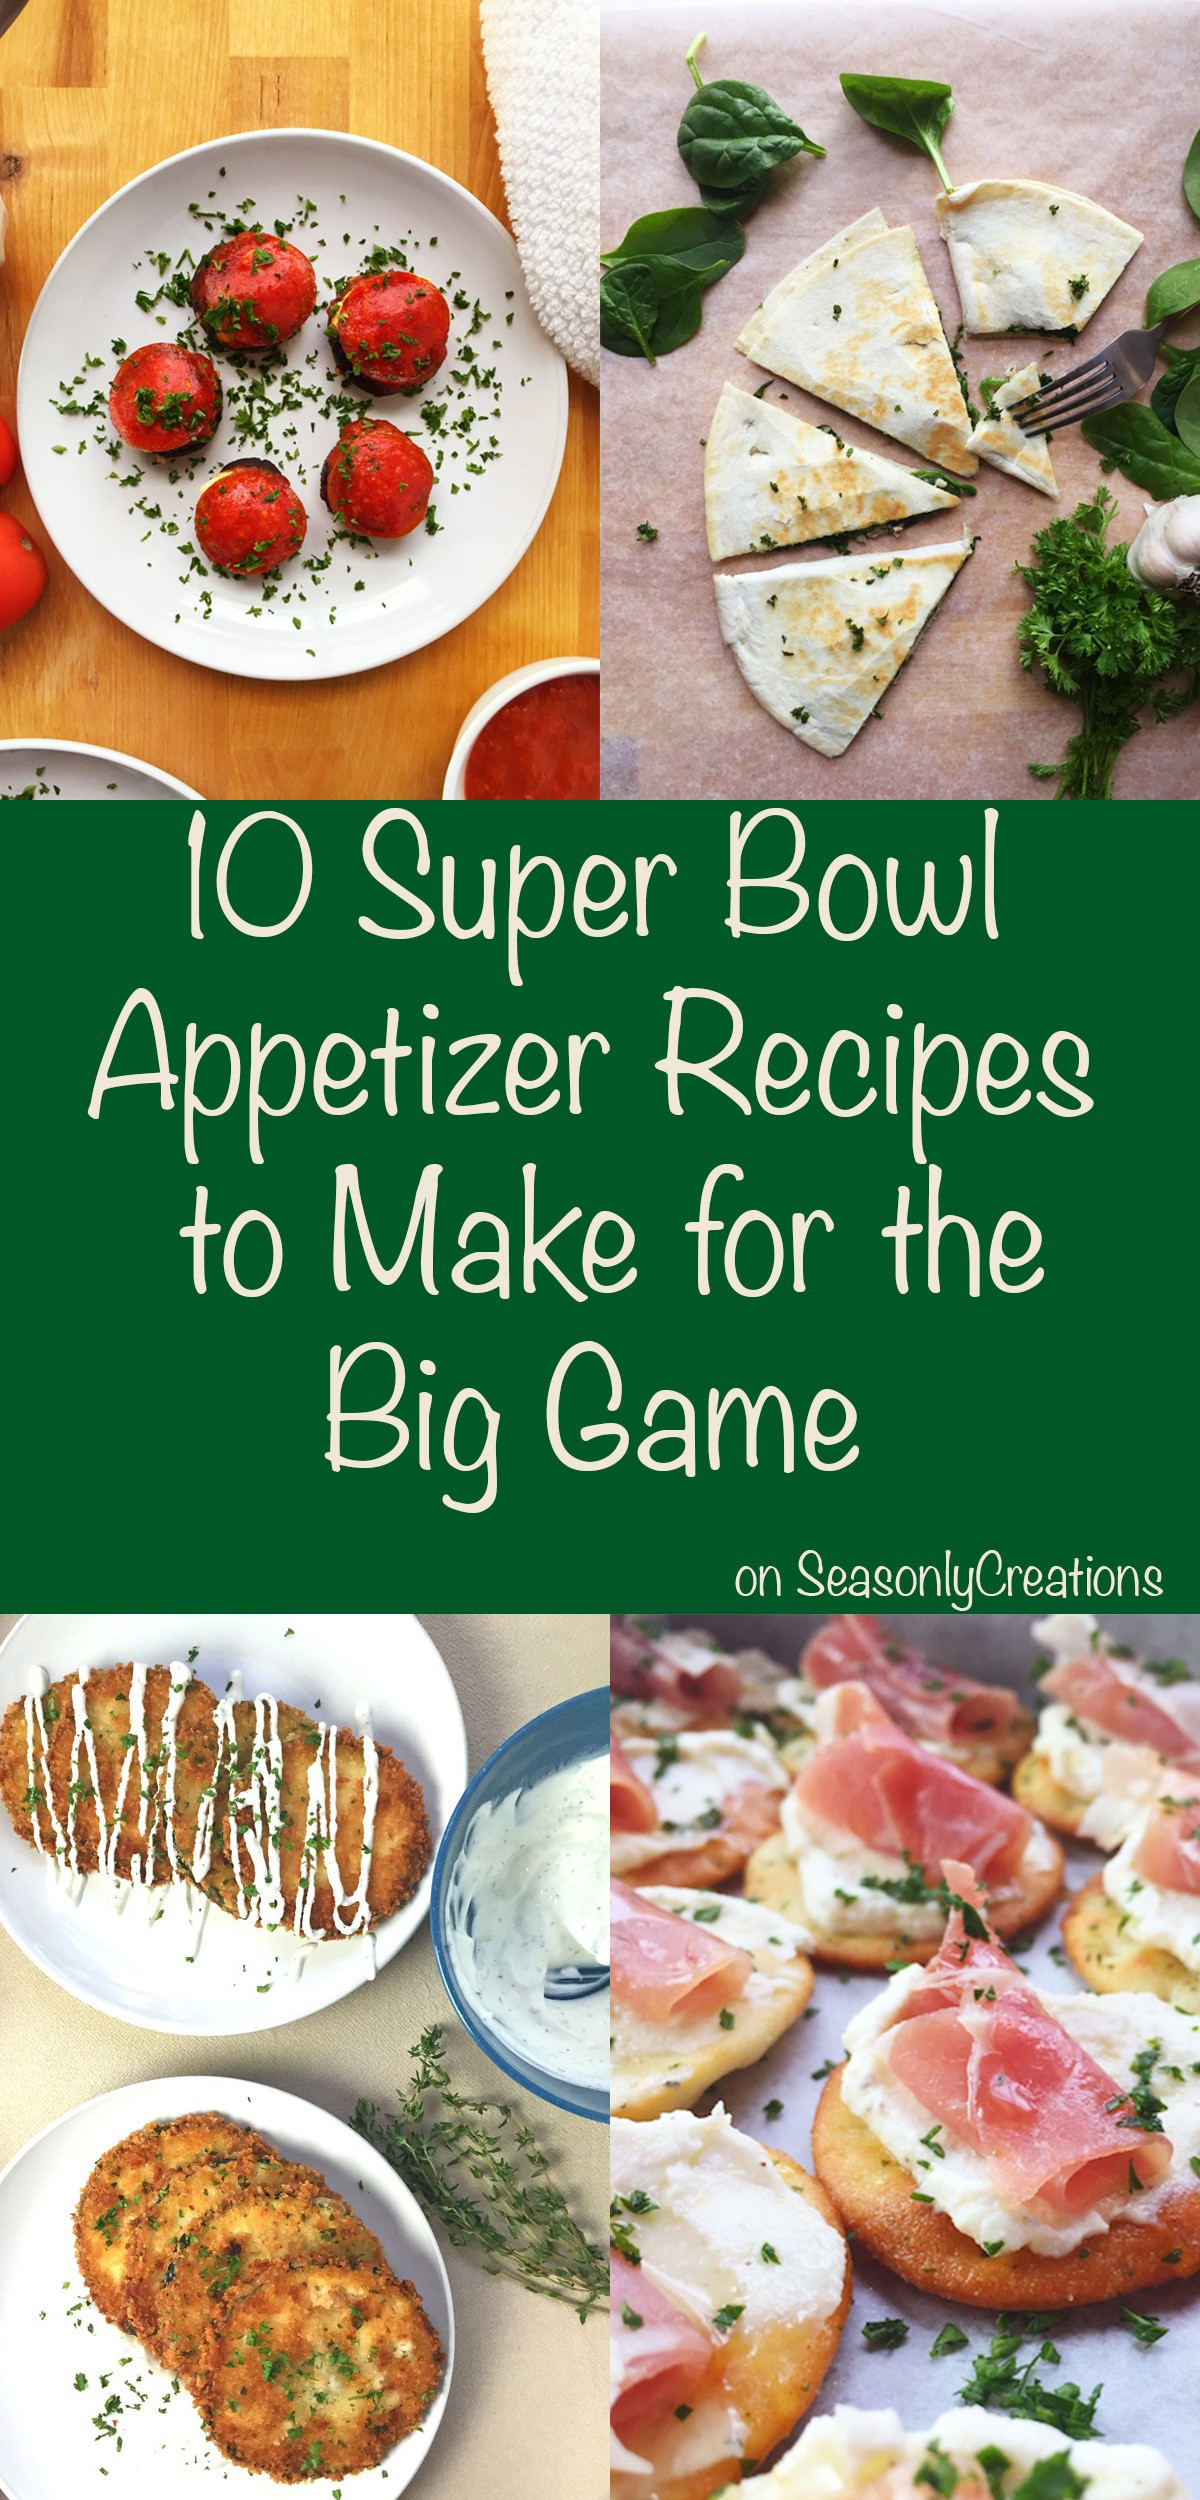 Recipes For Super Bowl Appetizers
 10 Super Bowl Appetizer Recipes to Make for the Big Game